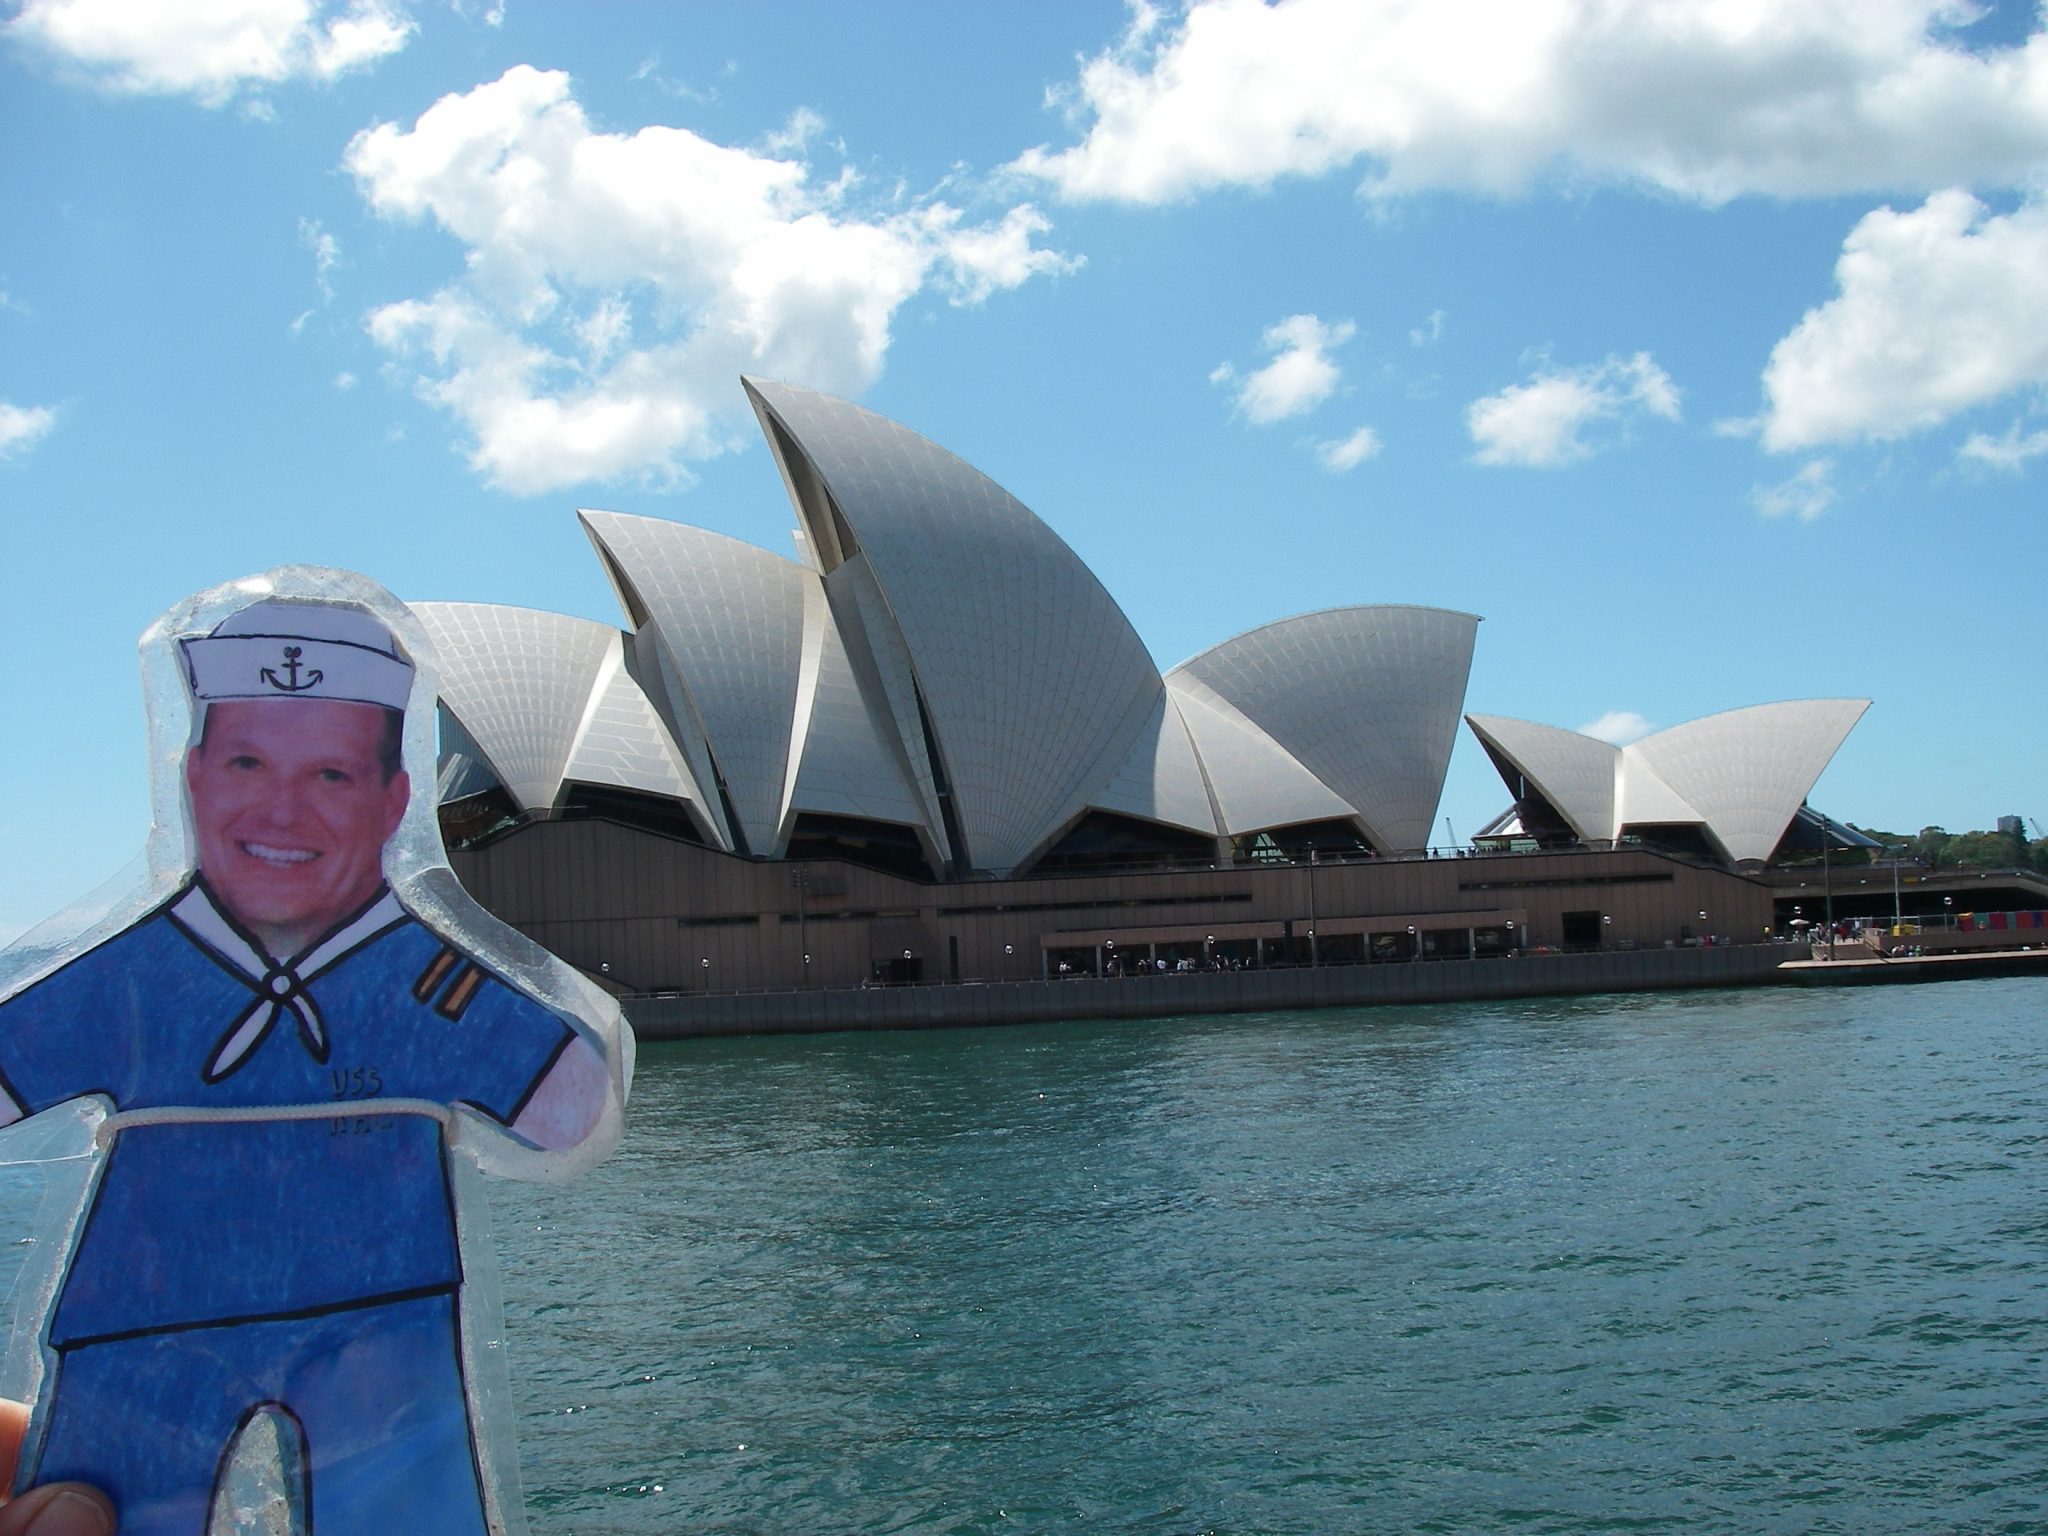 90. Another day, Flat Mr. Davis, Jeff and I visited the Sydney Opera House where they had an annual festival celebrating the cultures of indigineous peoples